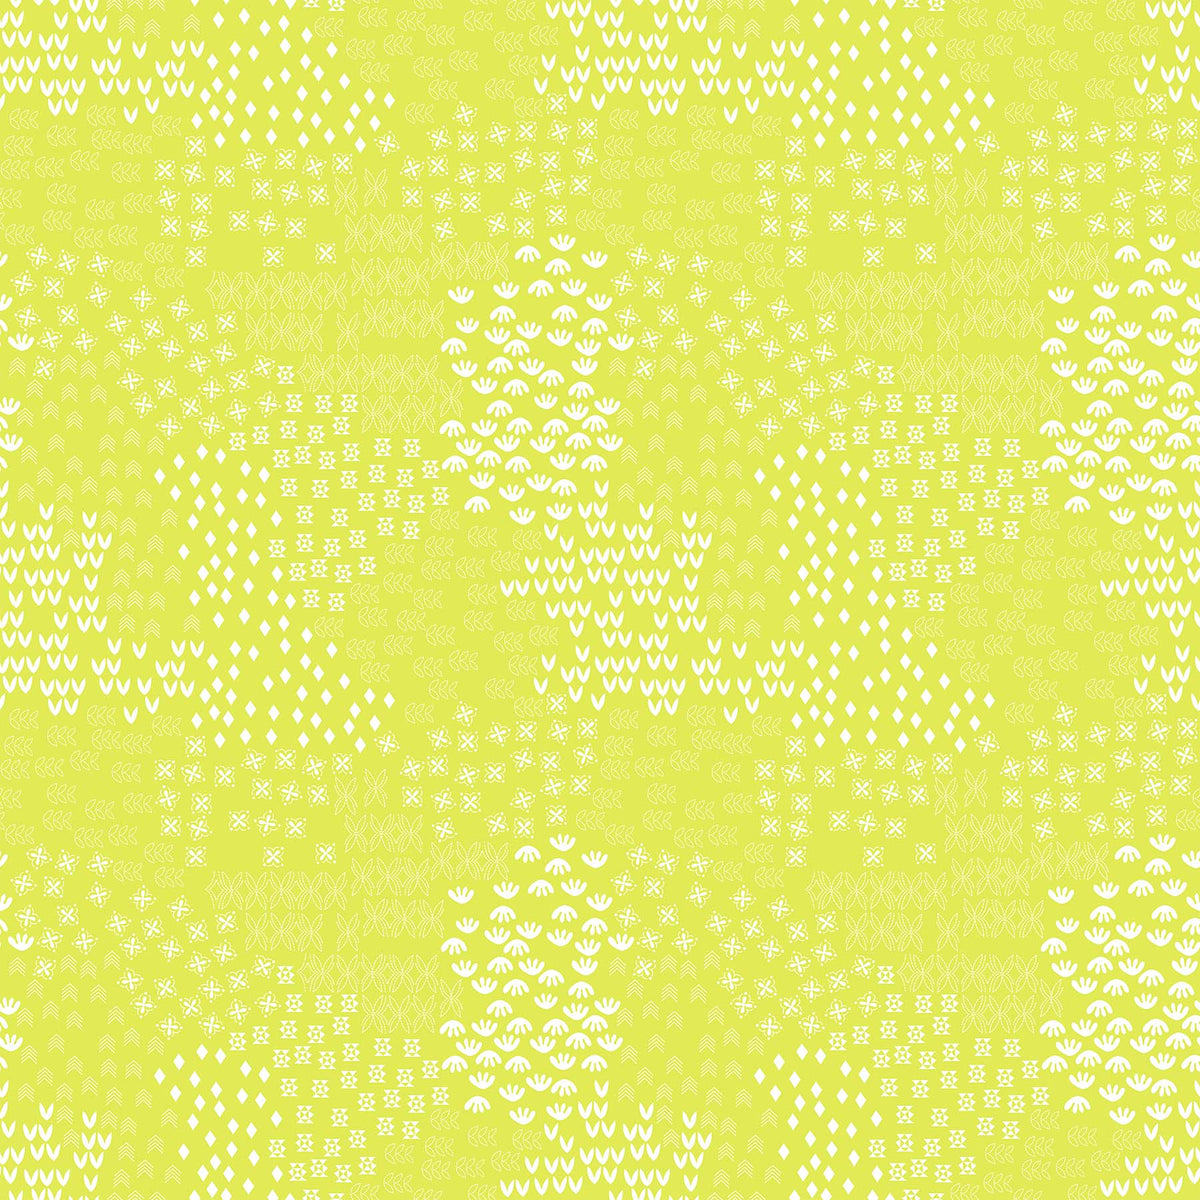 Hampton Court Quilt Fabric - Meadow in Yellow - 90589-50